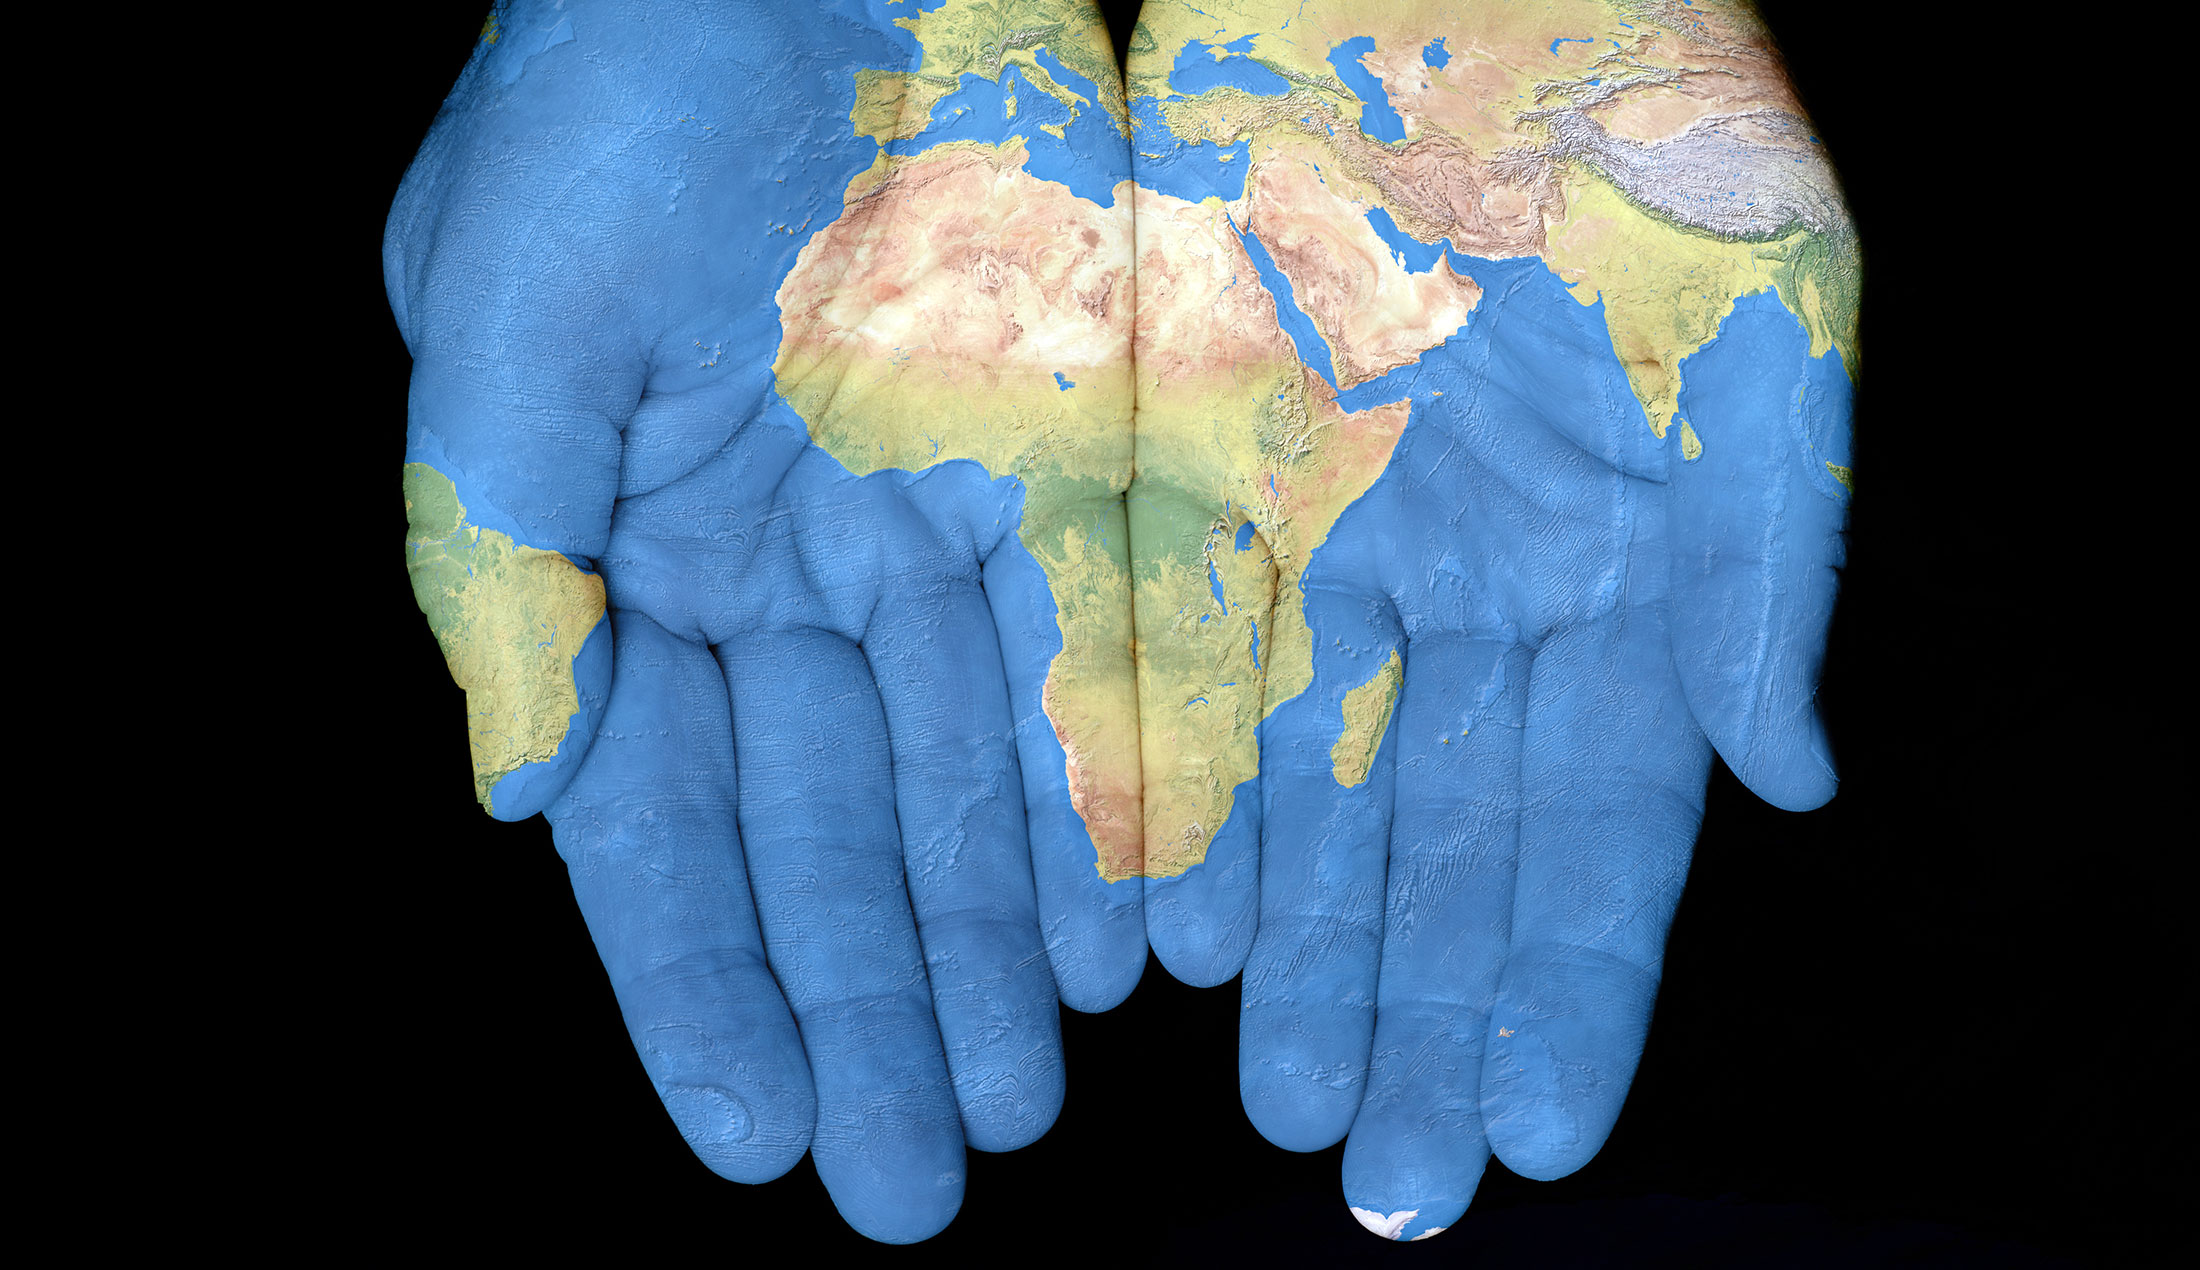 hands with a world map painted on them